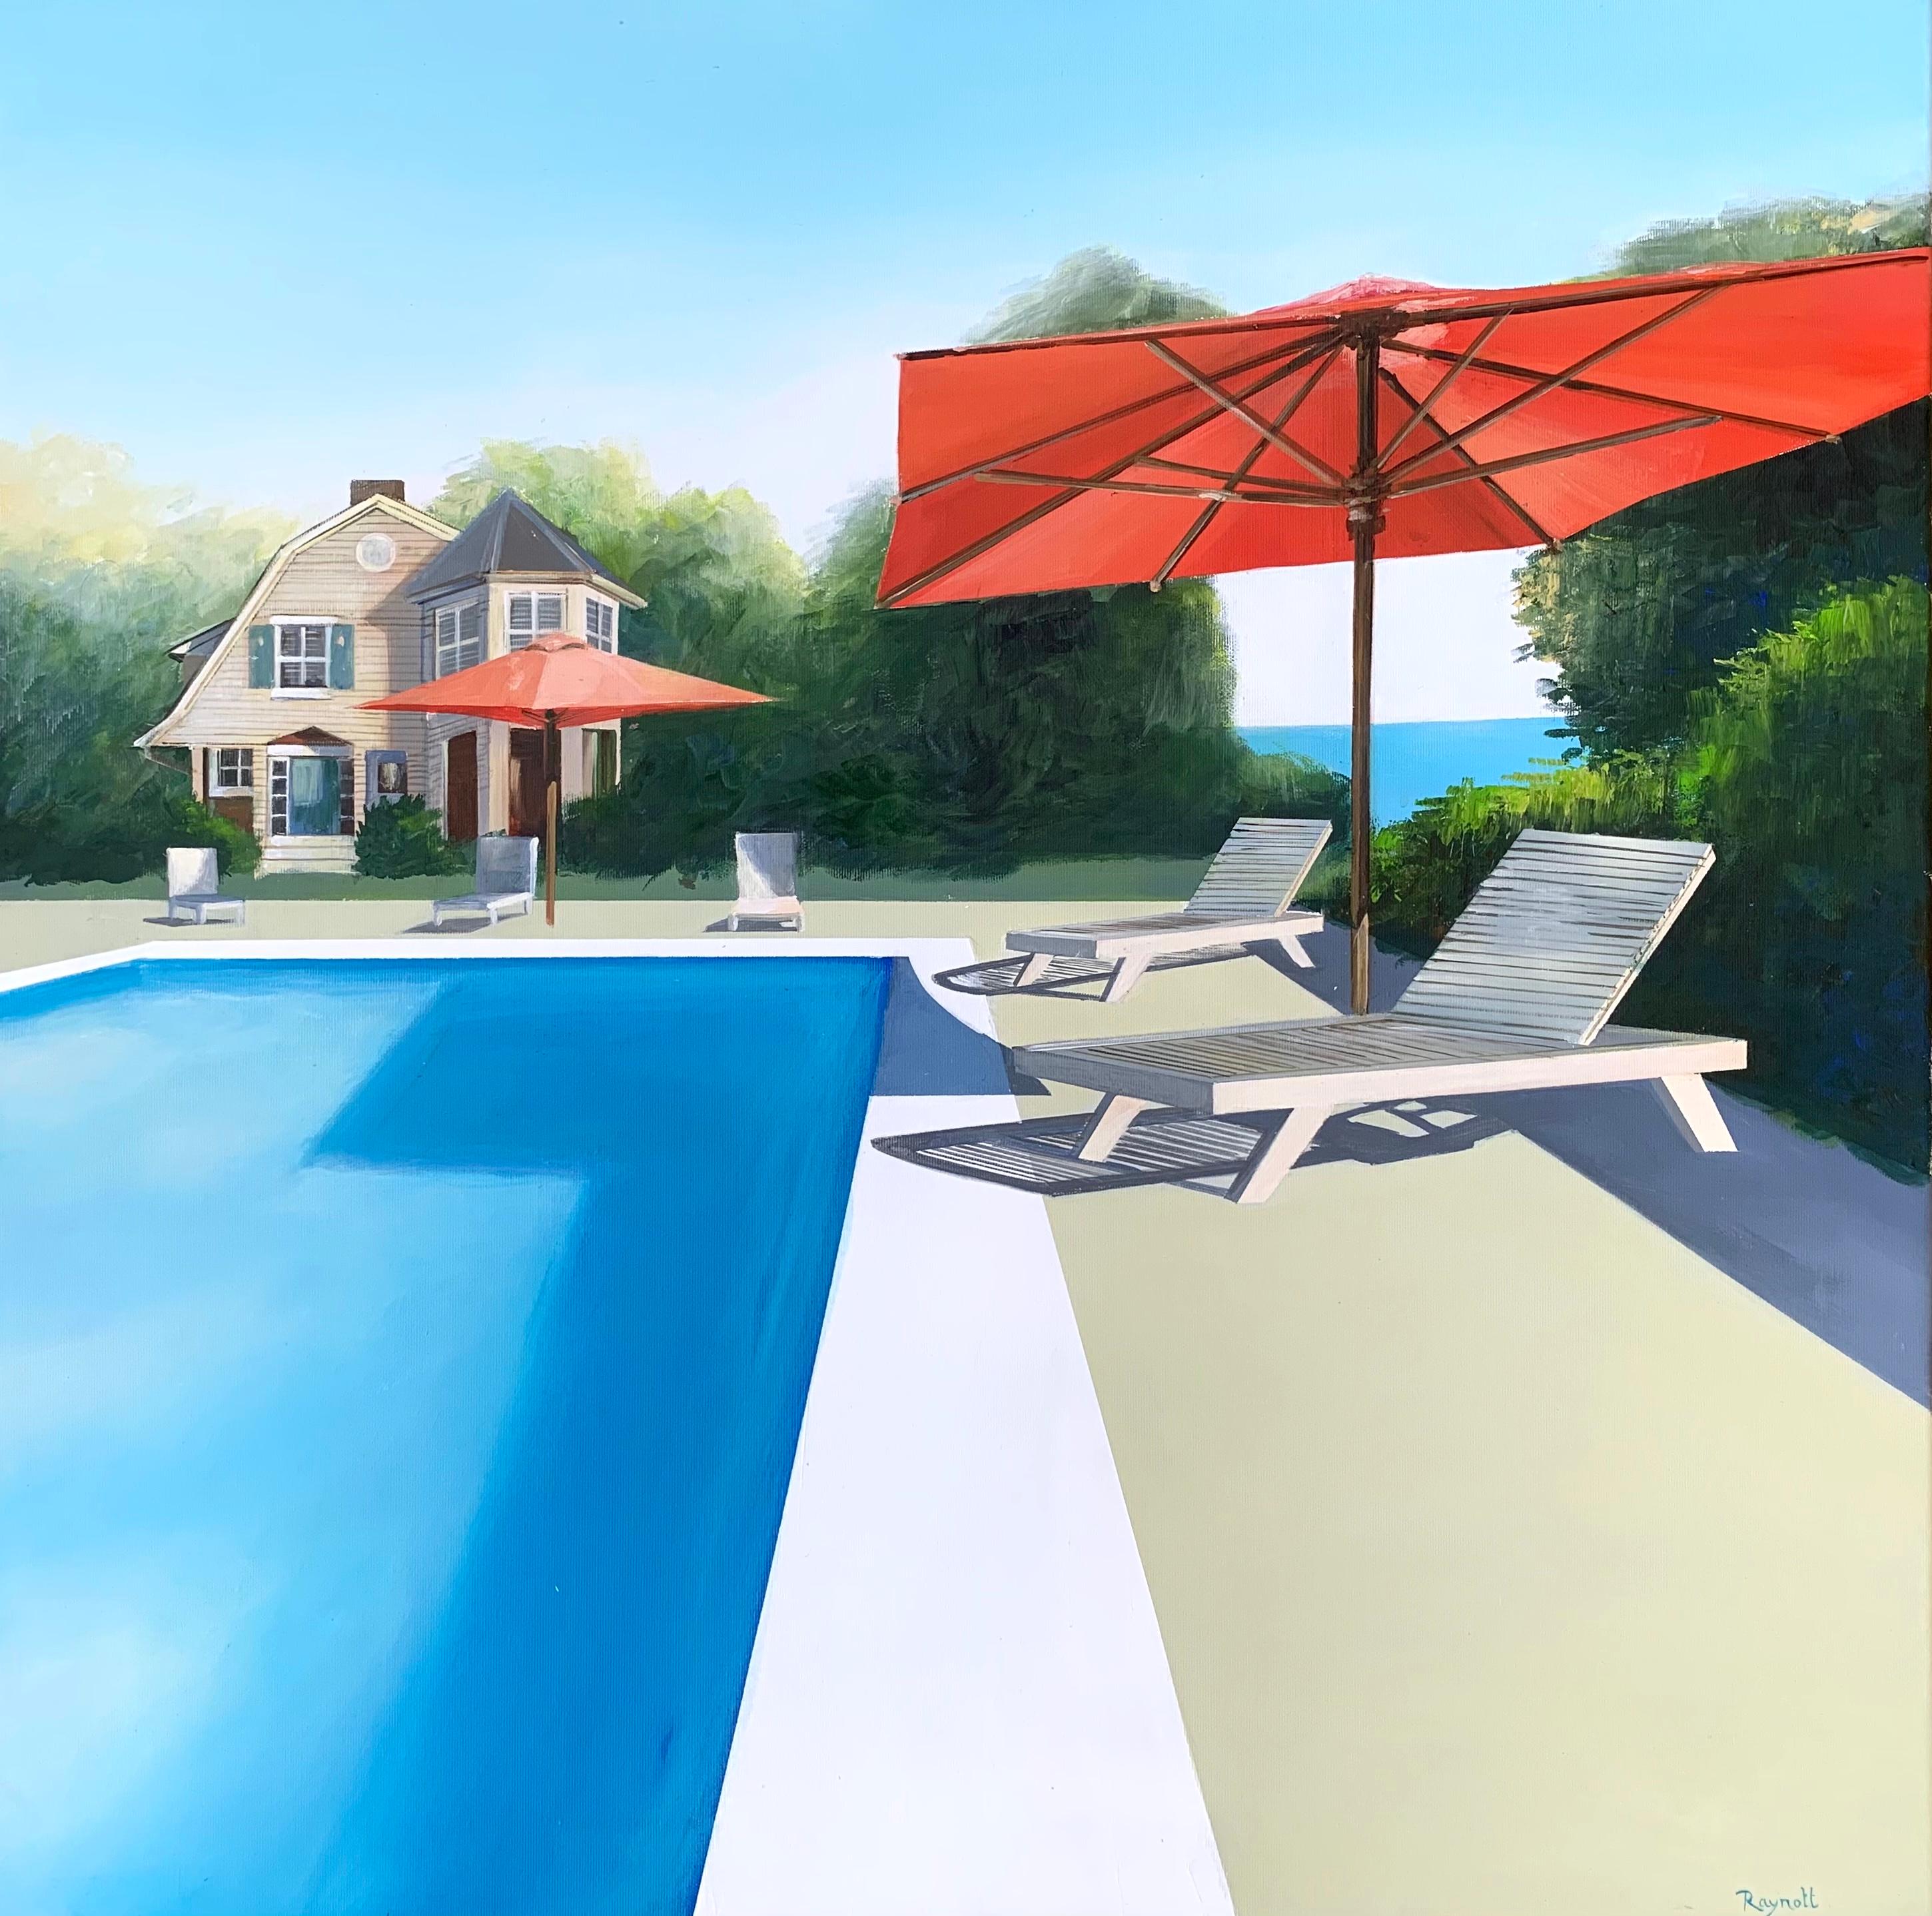 Daniel Raynott Figurative Painting - We'll have a good time in the Hamptons